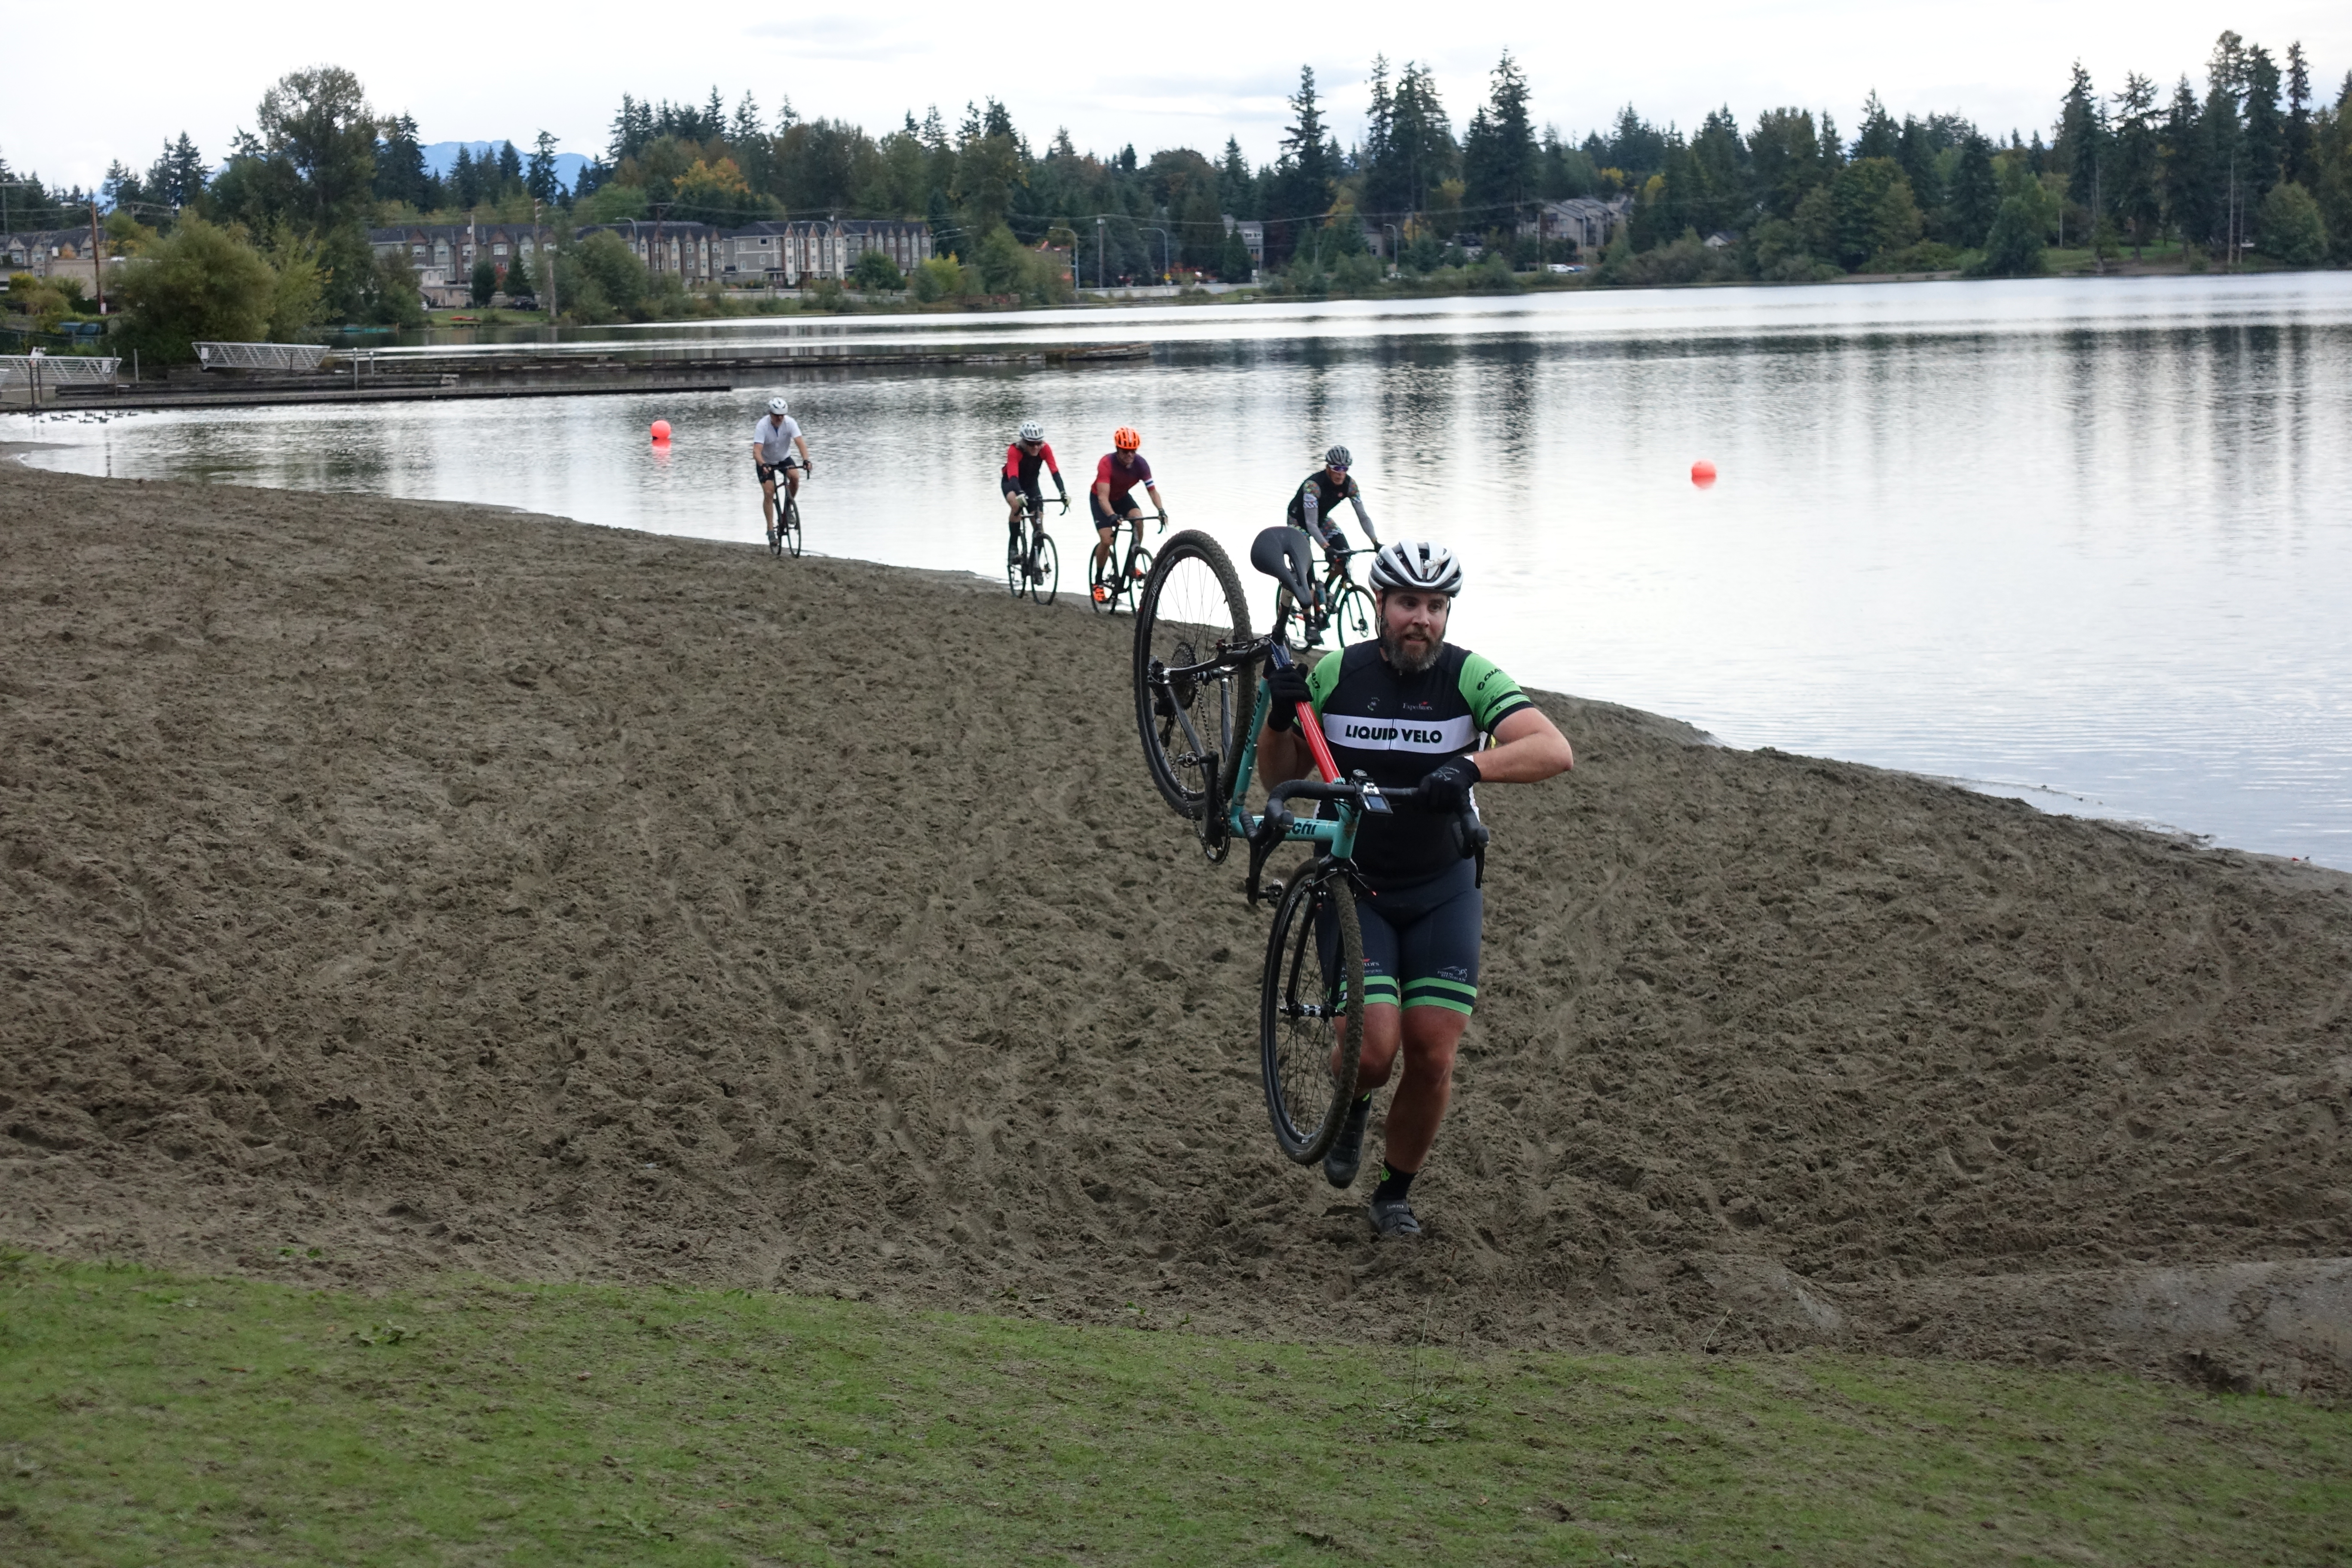 This Liquid Velo racer was all smiles running up the berm at the end of the beach section.